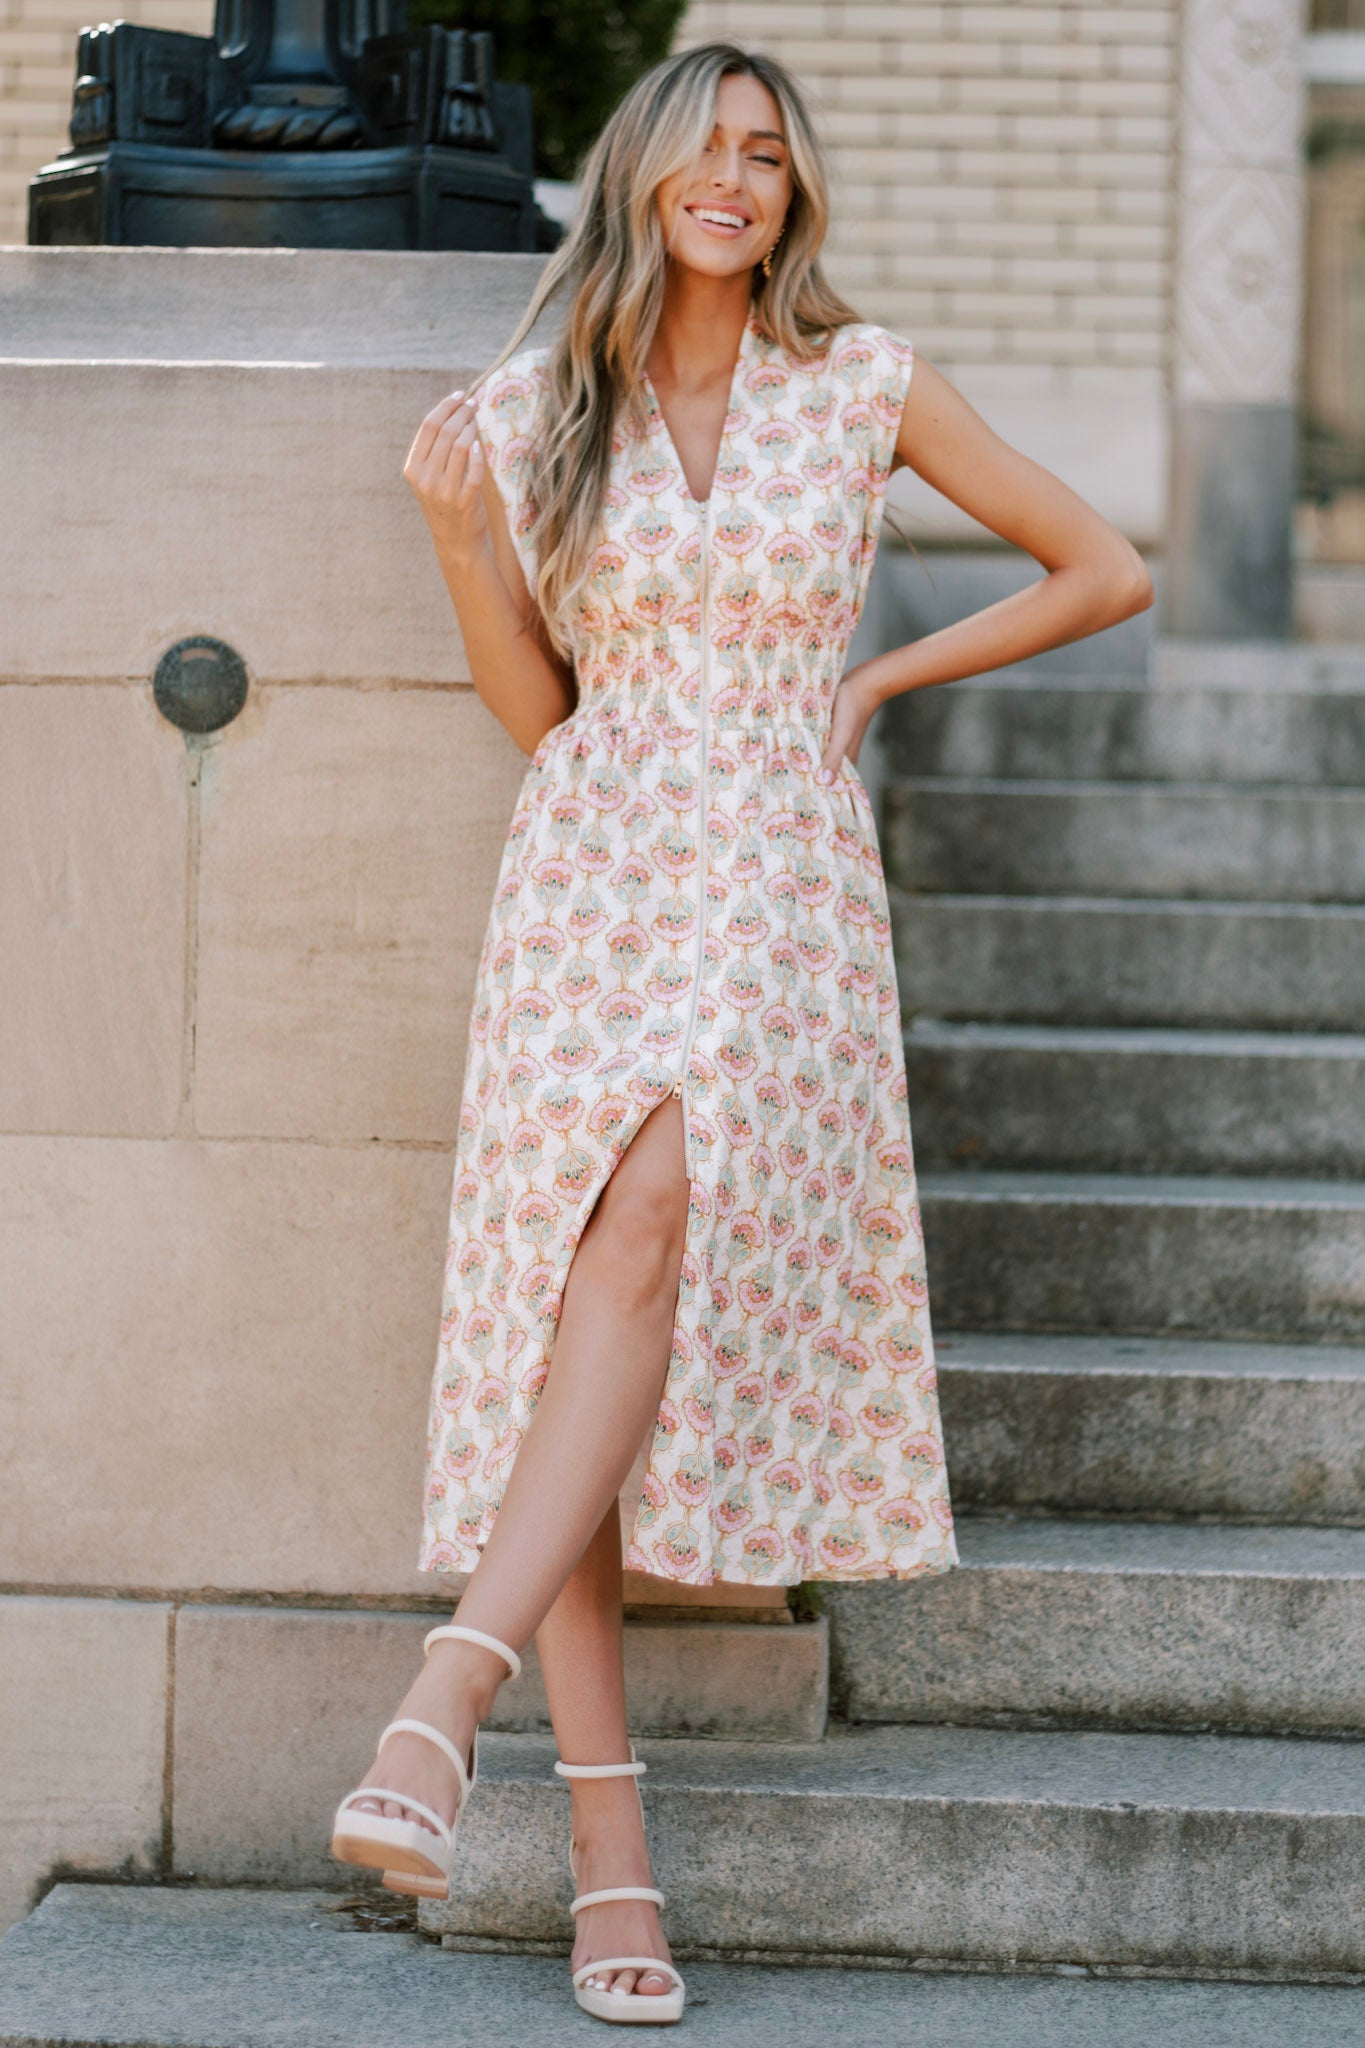 Ivory floral print dress featuring a v-neckline, wide shoulders, a full zipper front, fully smocked waist, and a front slit.